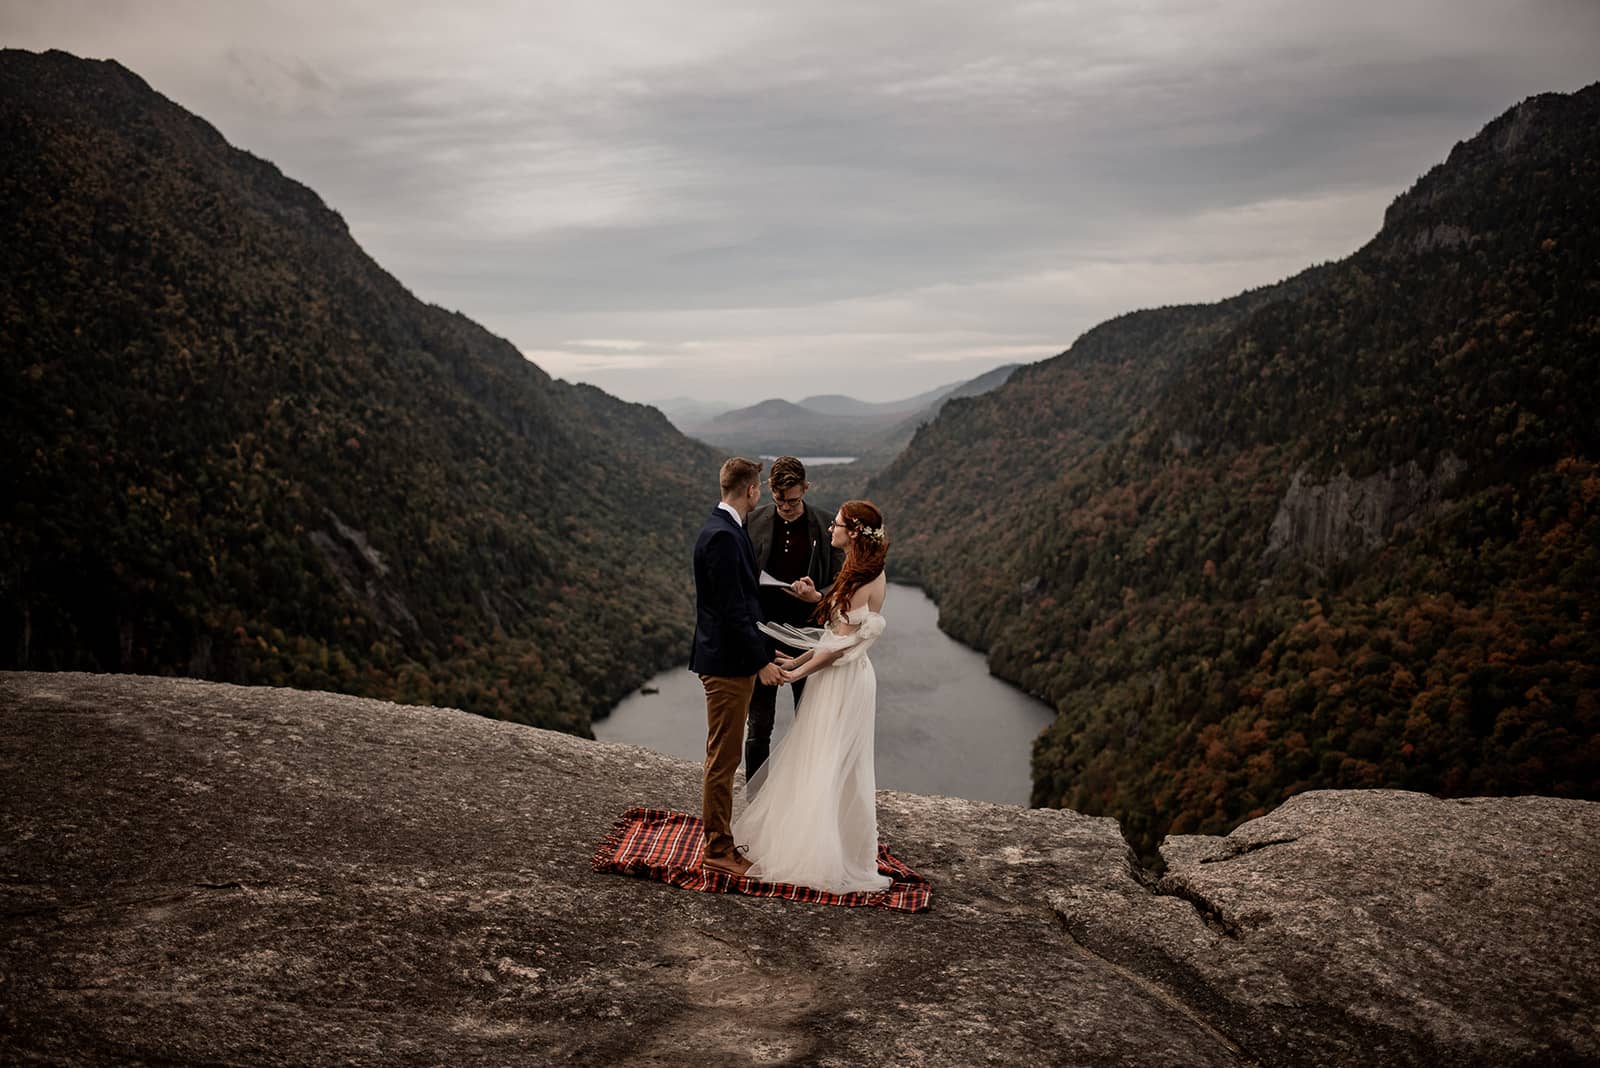 Elopement ceremony above the Ausable River in the Adirondacks